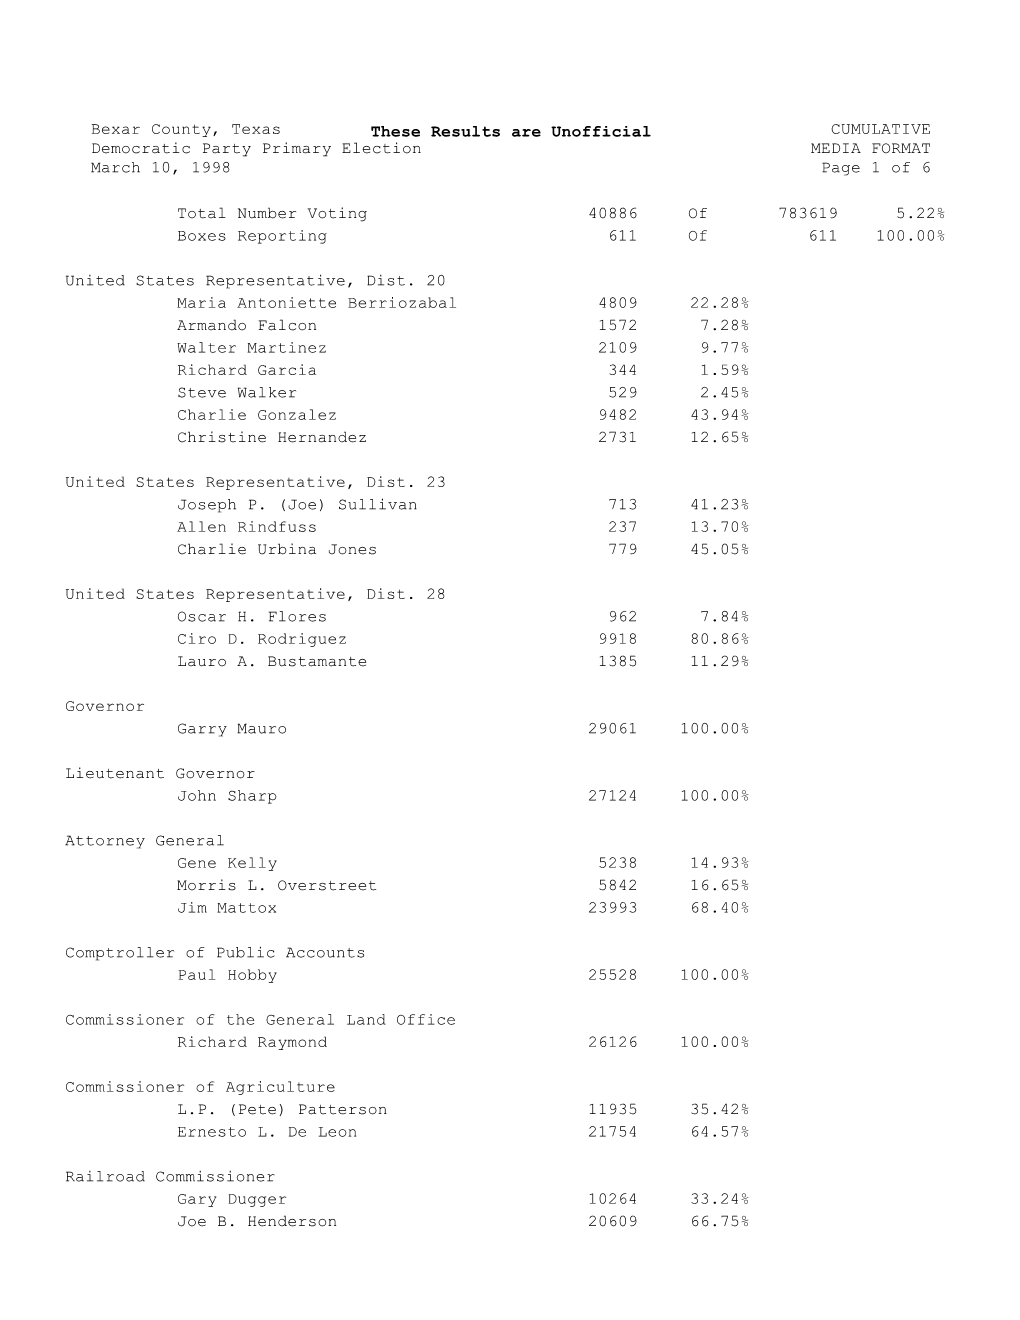 Bexar County, Texas Democratic Party Primary Election March 10, 1998 These Results Are Unofficial CUMULATIVE MEDIA FORMAT Page 1